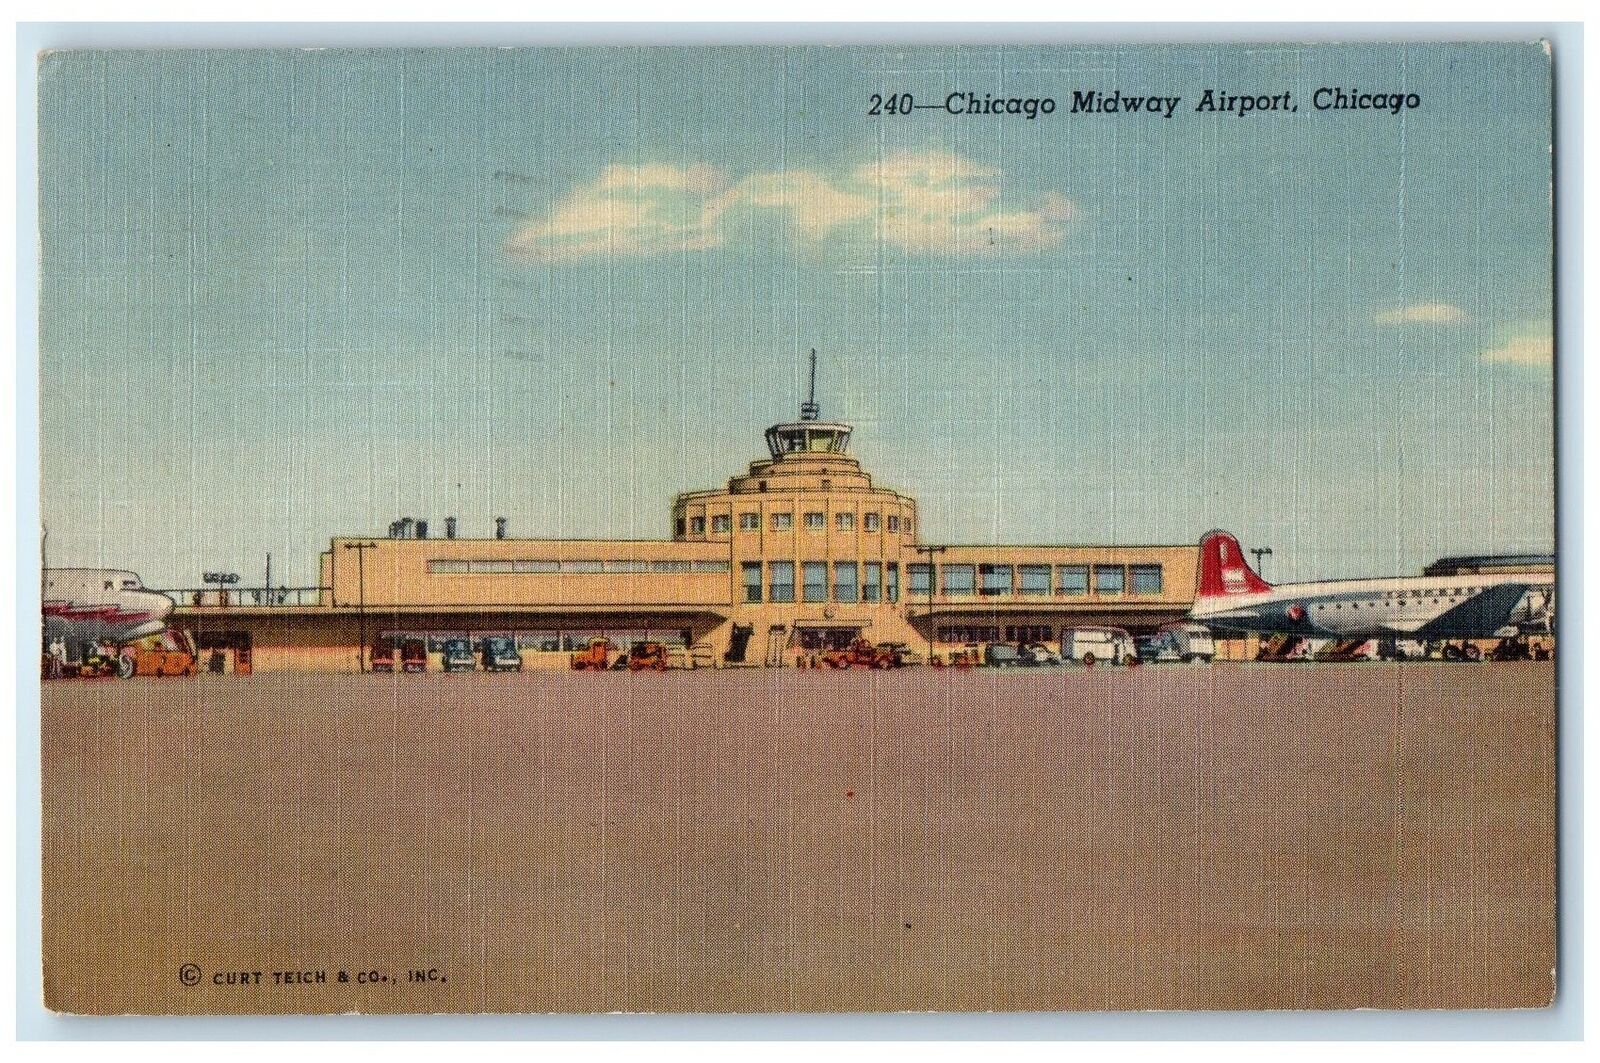 1953 Chicago Midway Airport Largest Traffic Volume Tower Control IL Postcard